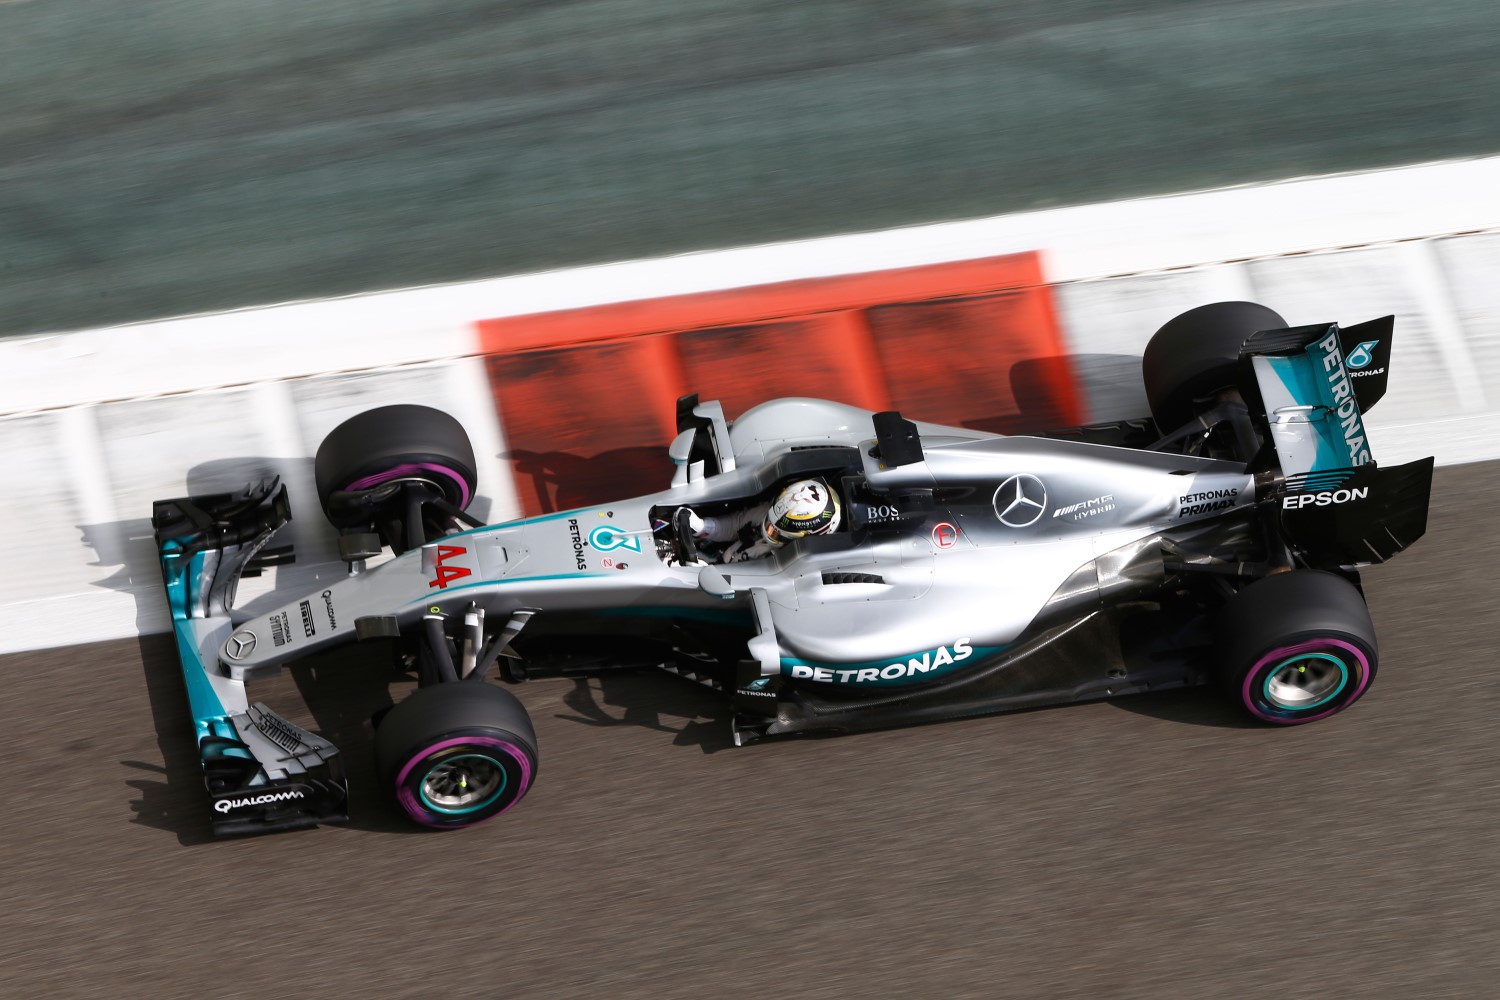 Will one of the Mercedes' suffer an engine failure?